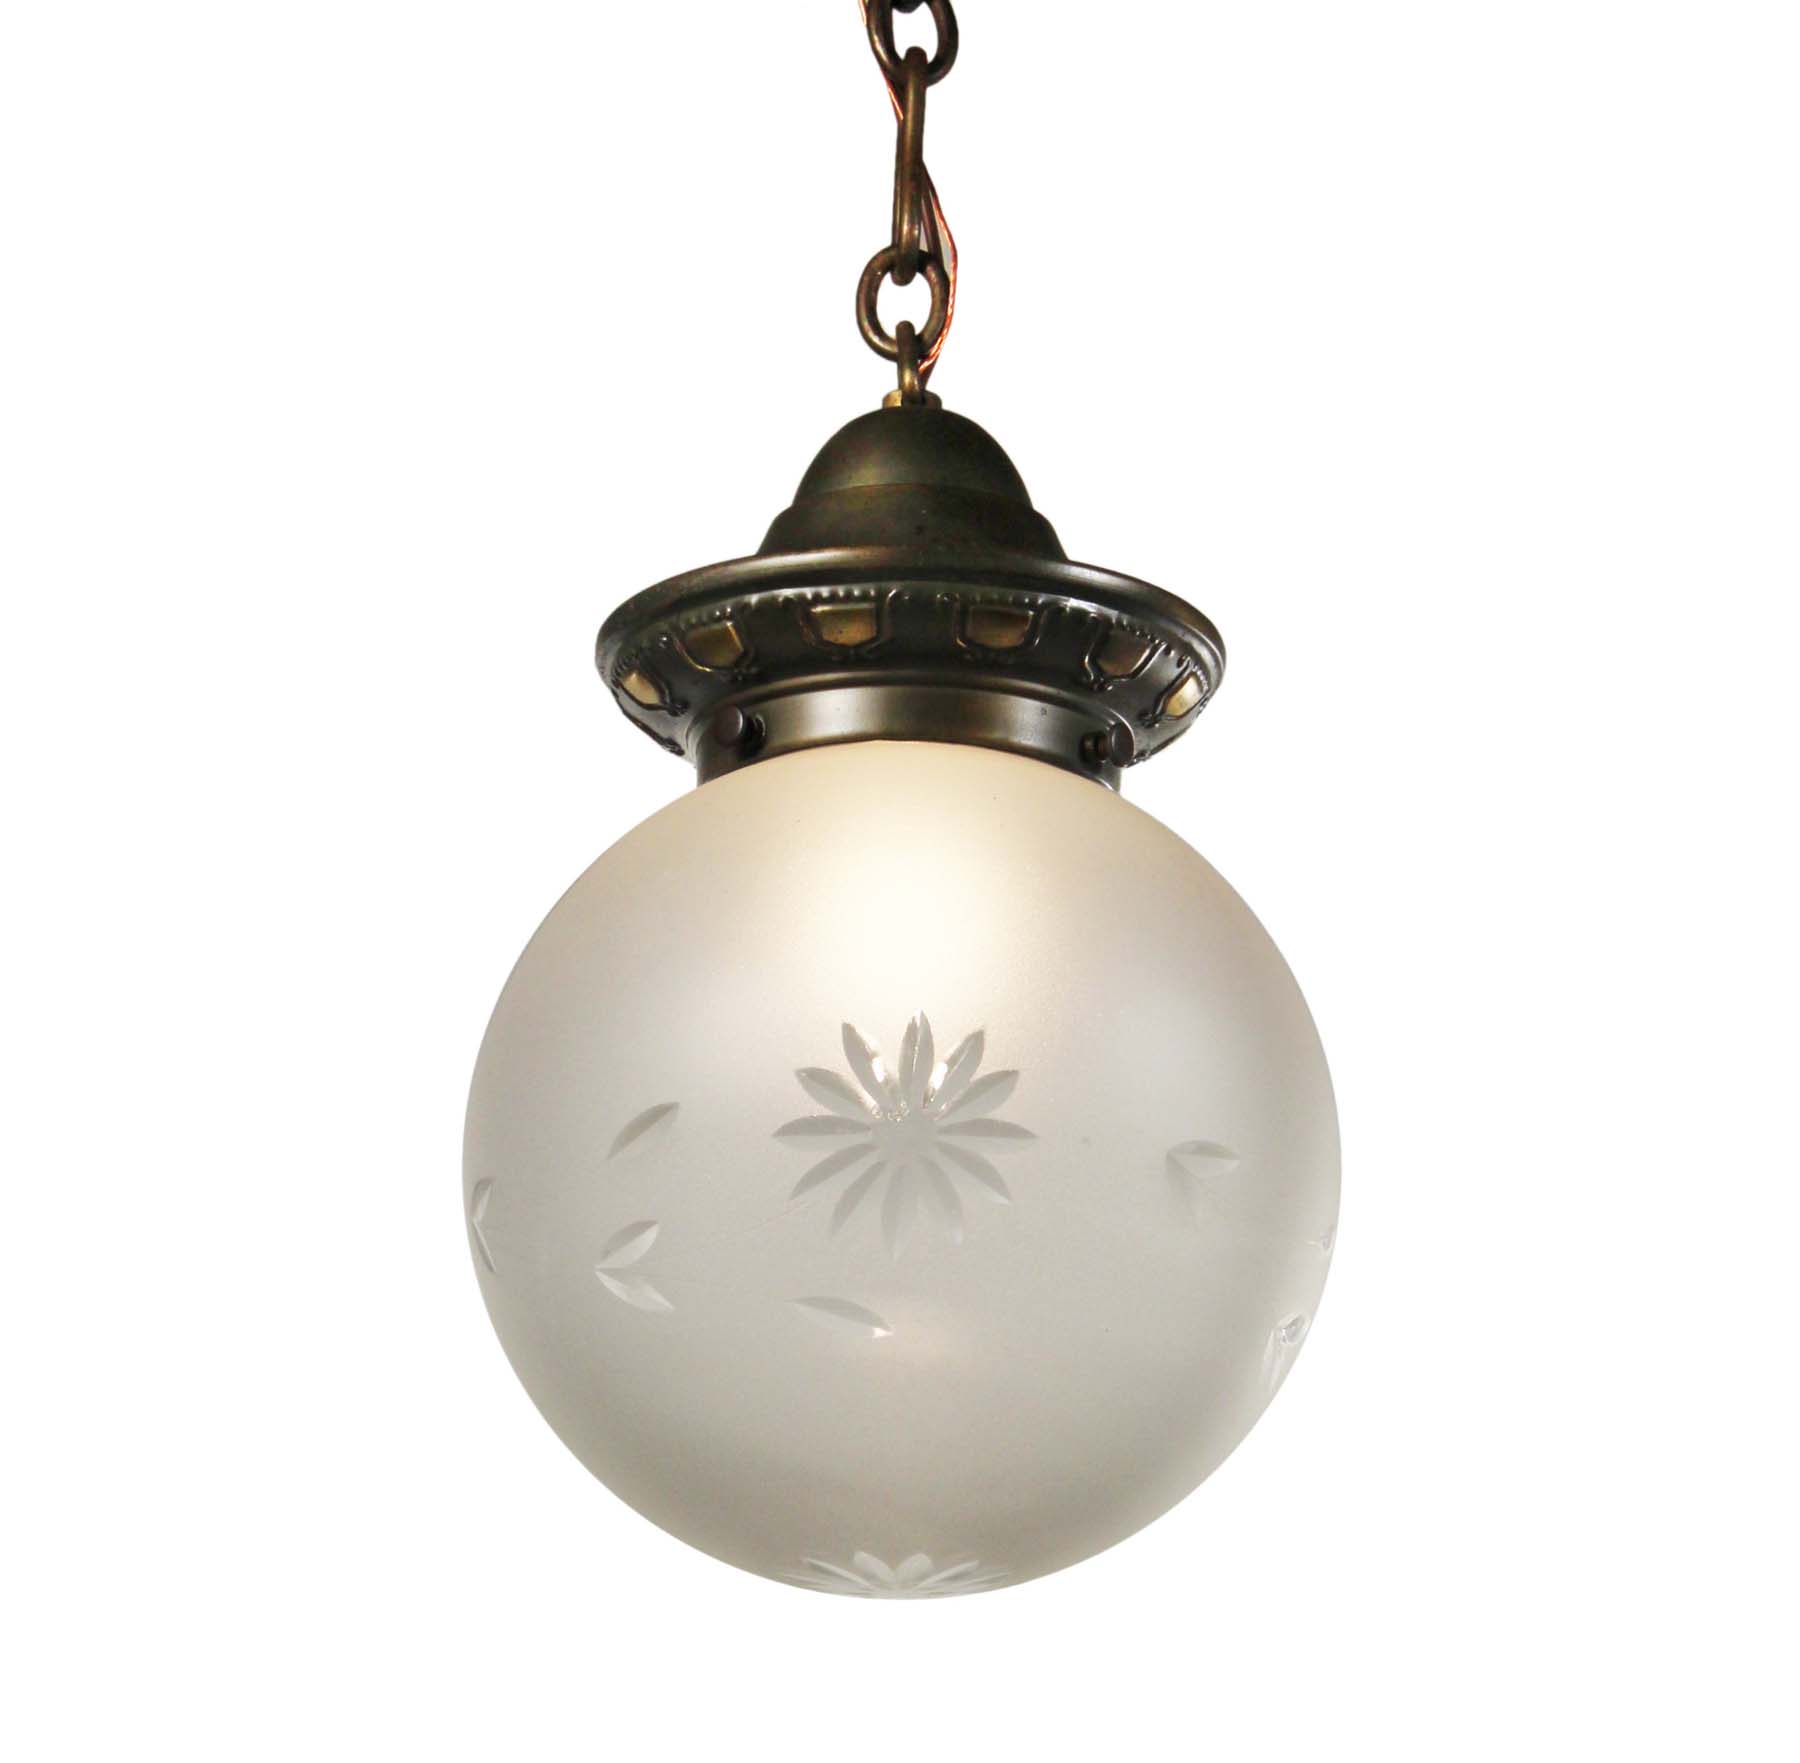 SOLD Antique Brass Pendant with Original Ball Shade, c. 1910-0